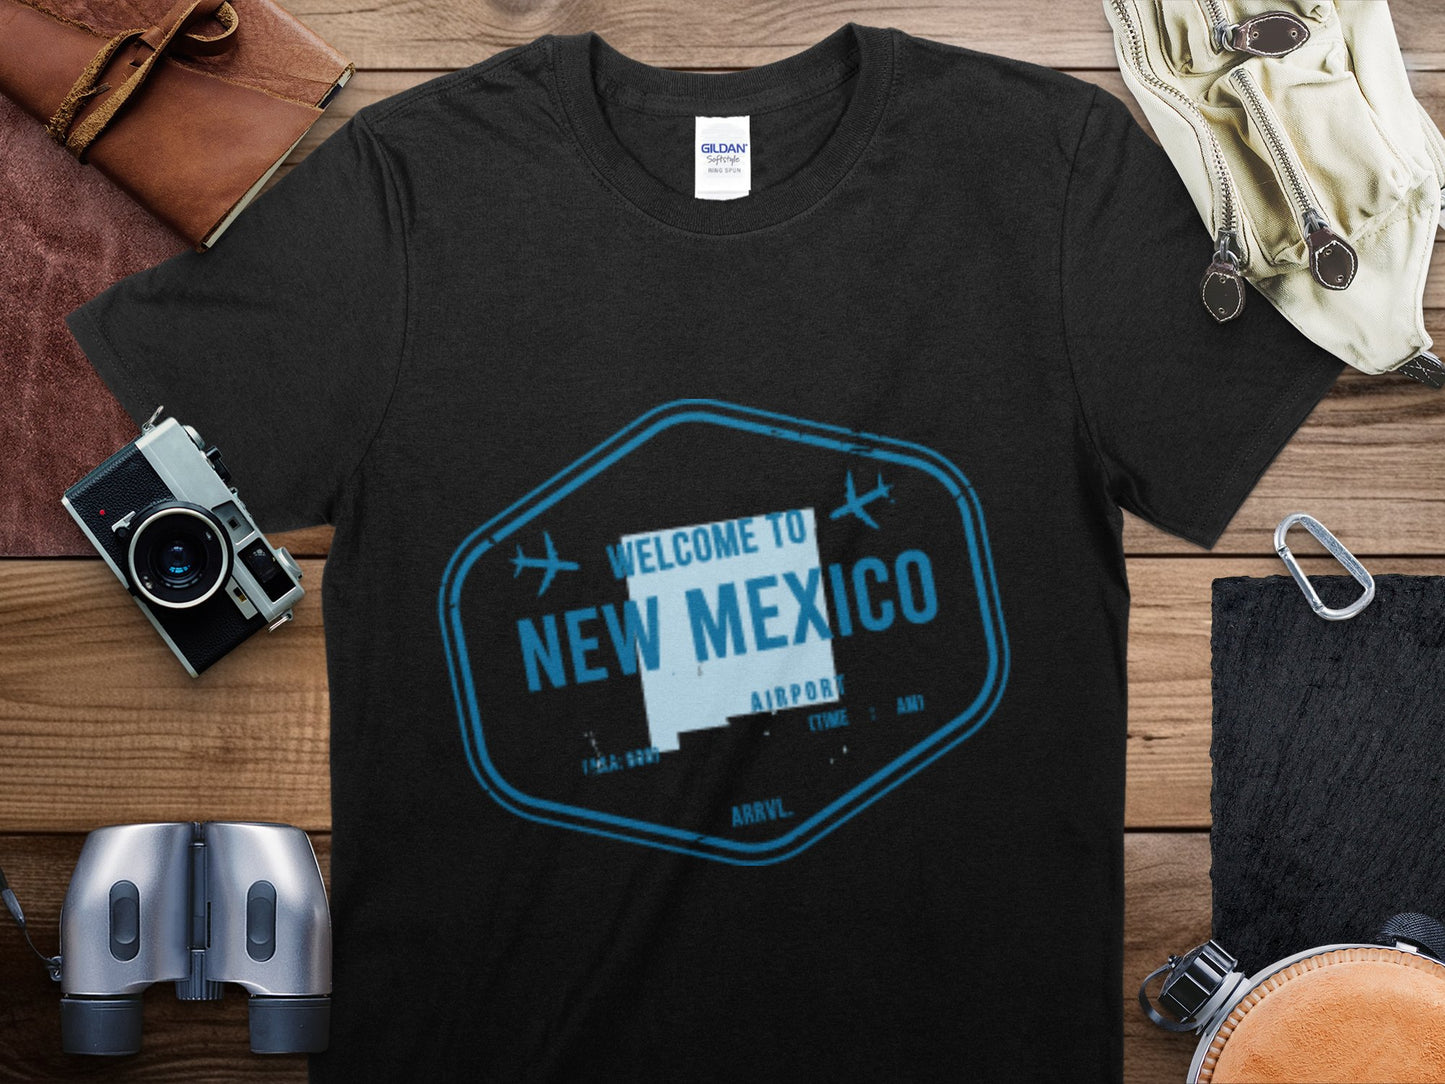 New Mexico 1 Stamp Travel T-Shirt, New Mexico 1 Travel Shirt